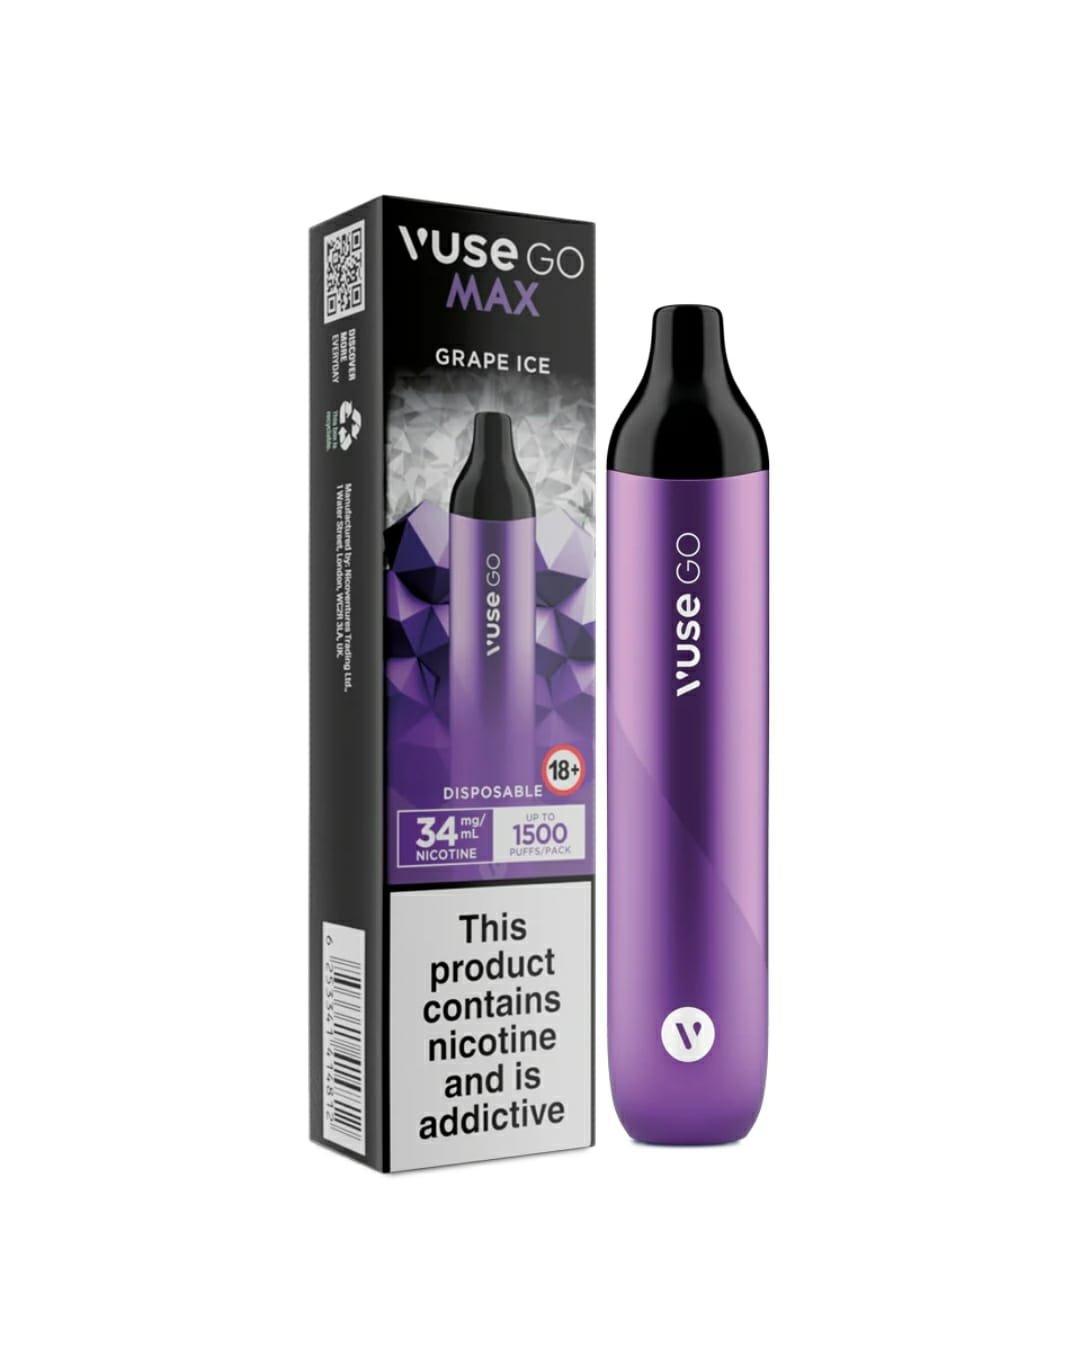 vuse-go-max-disposable-grape-ice-1500-puffs